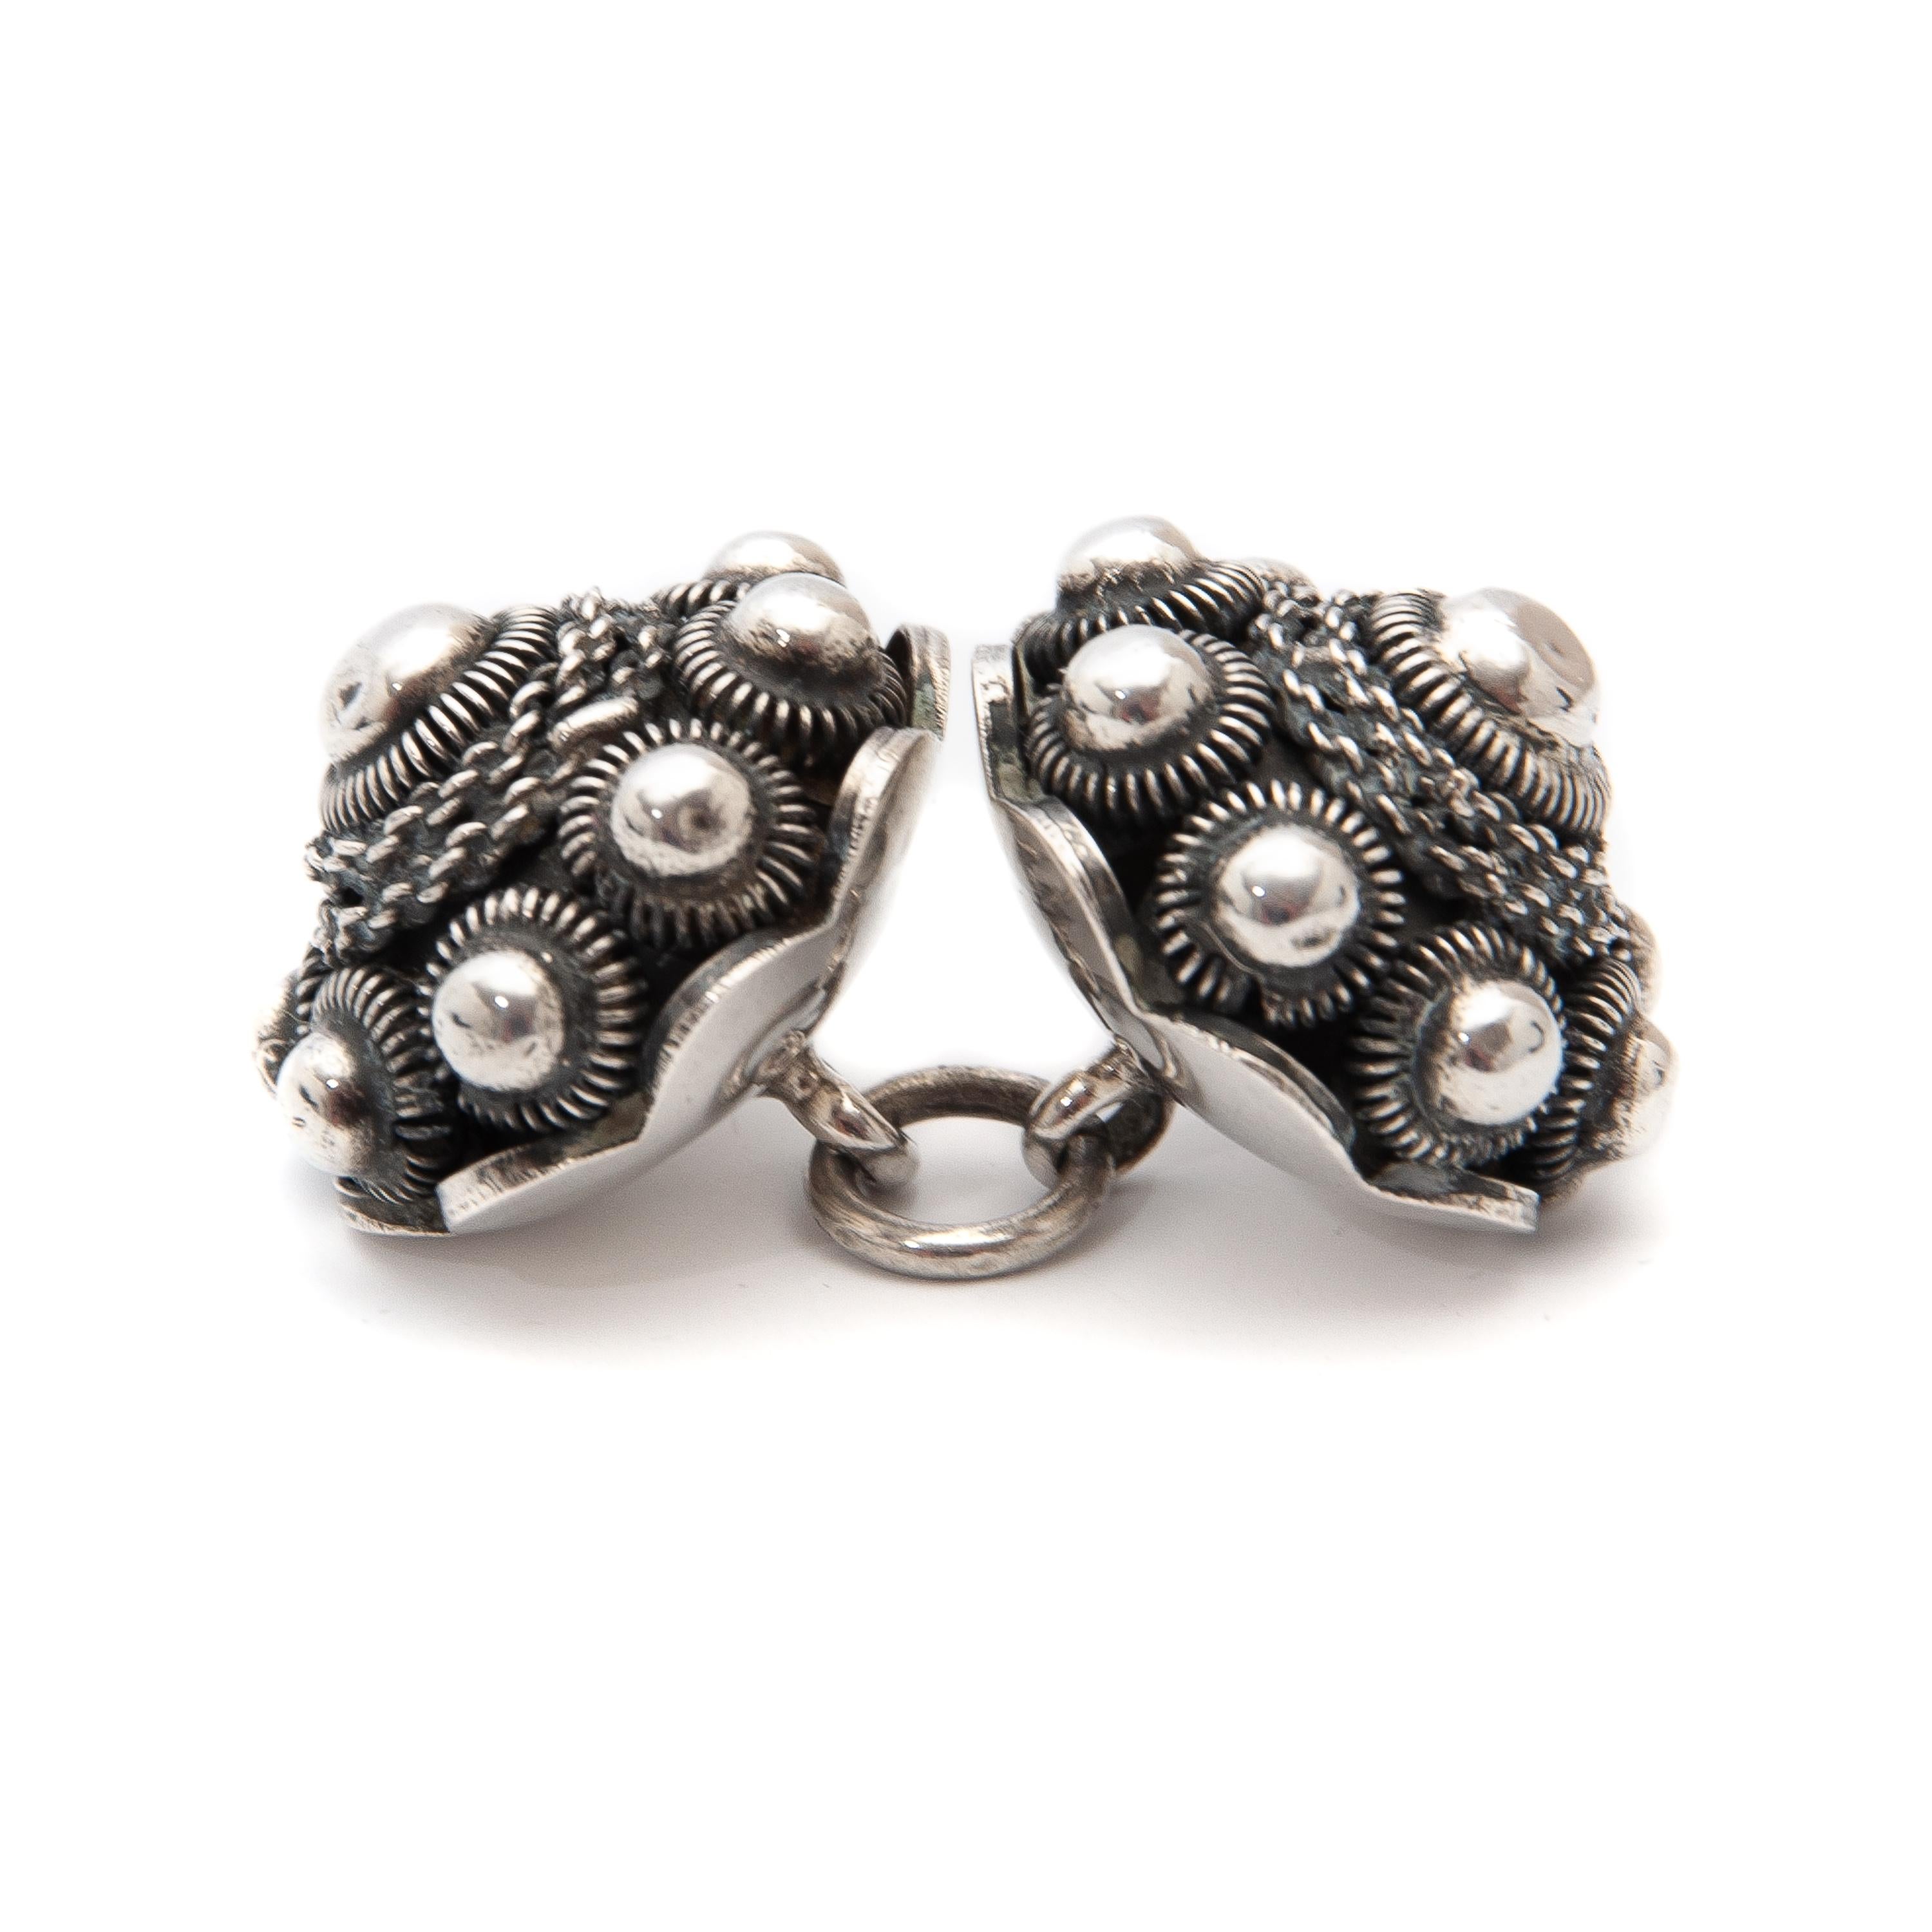 This pair of antique sterling silver Zeeland throat knots are set with an intermediate ring. The knots or buttons were worn by Dutch Zeeland men and are part of the Walcher traditional regional costume in the Netherlands around 1900. They were worn